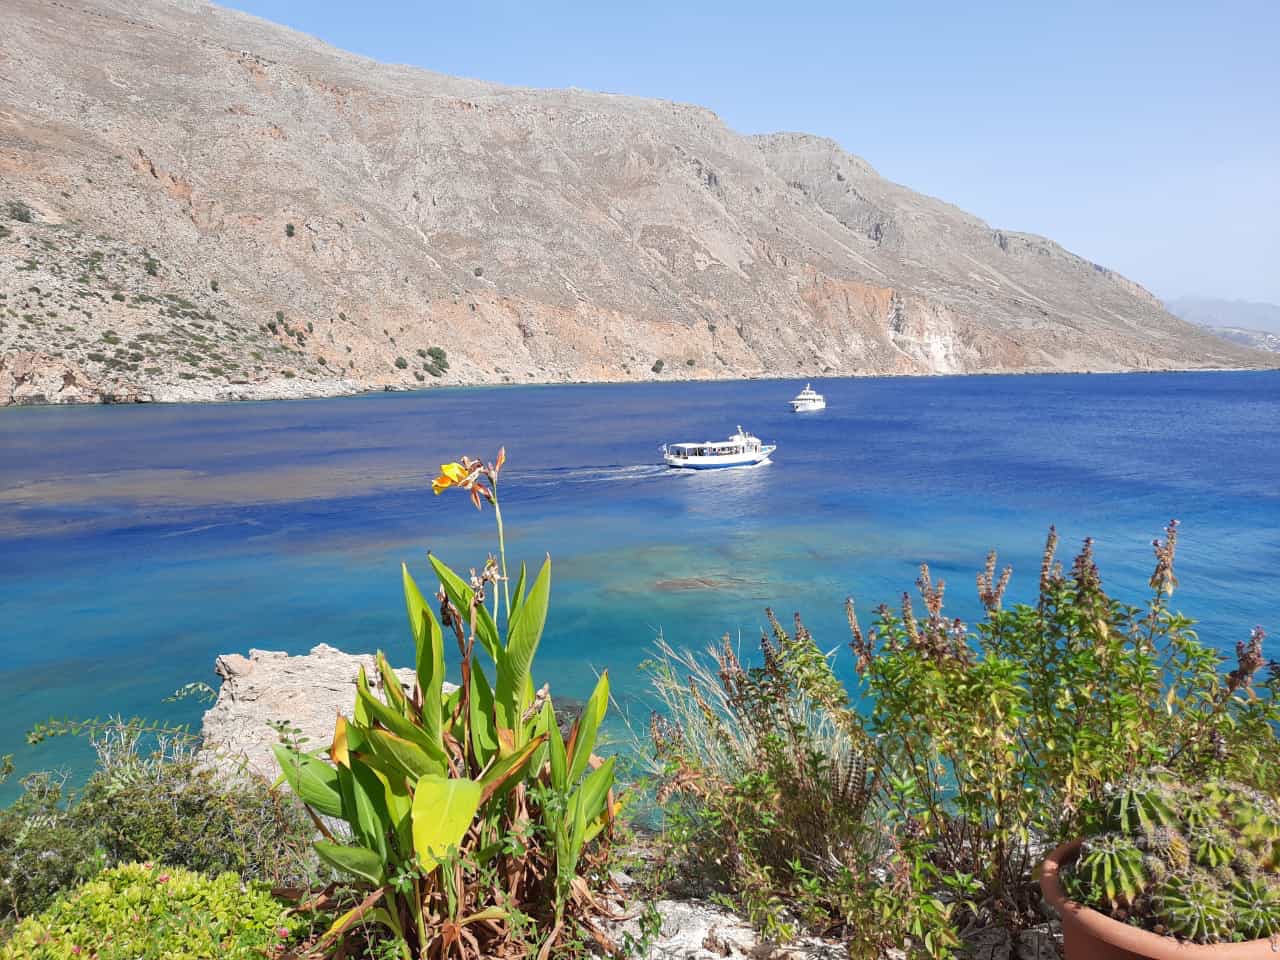 The Far Out South Exploring Amazing South Chania, activities south chania crete, imbros gorge hiking, loutro village, sfakia village, best activity south crete, activities chania crete, things to do chania crete, visit south chania crete activity